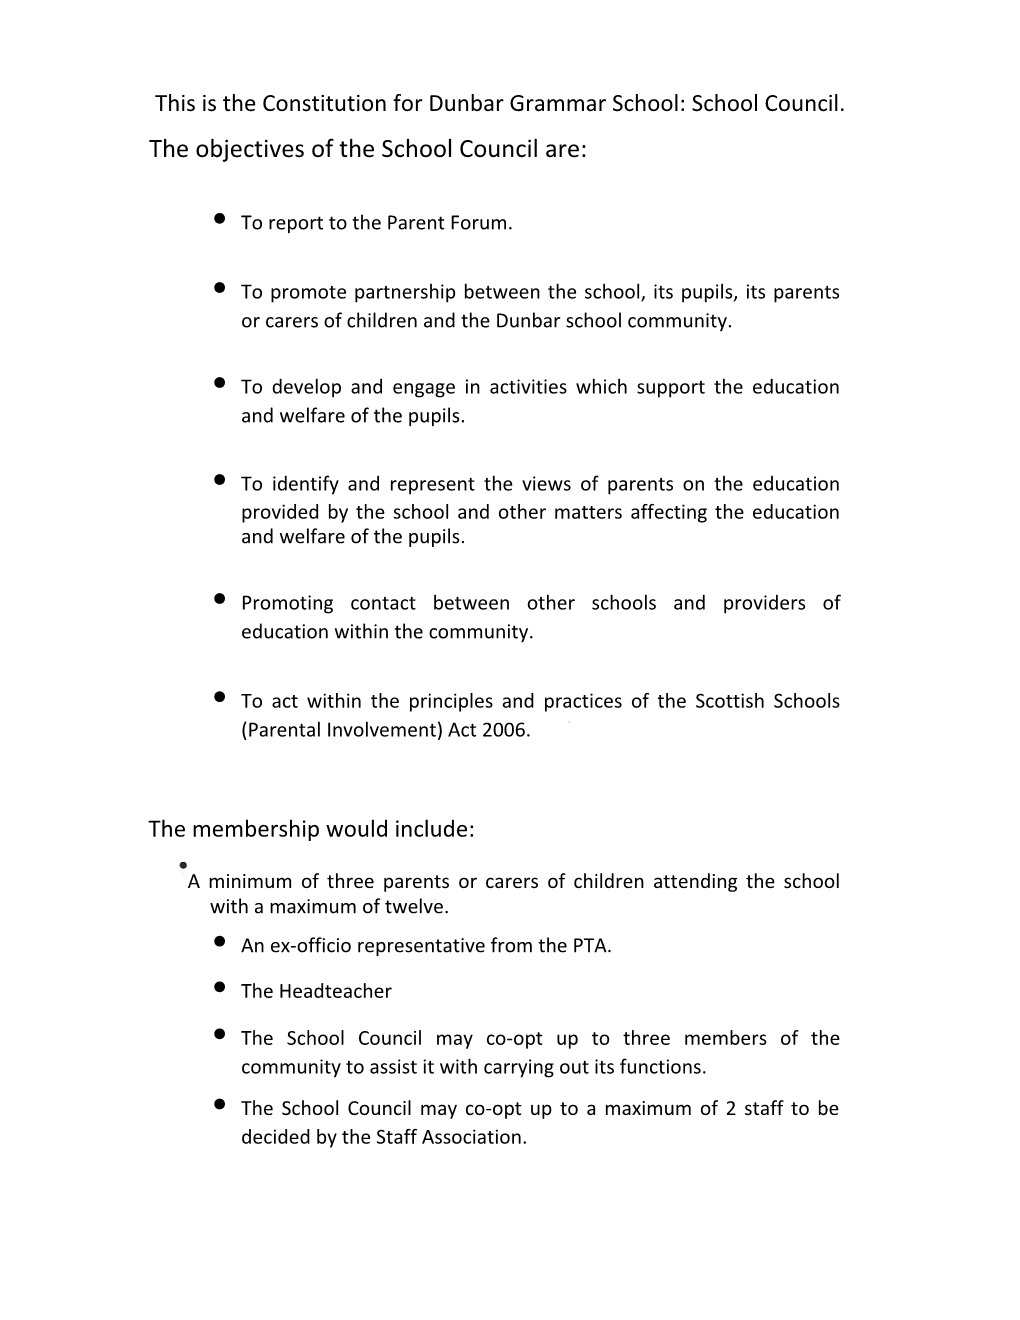 This Is the Constitution for Dunbar Grammar School: School Council